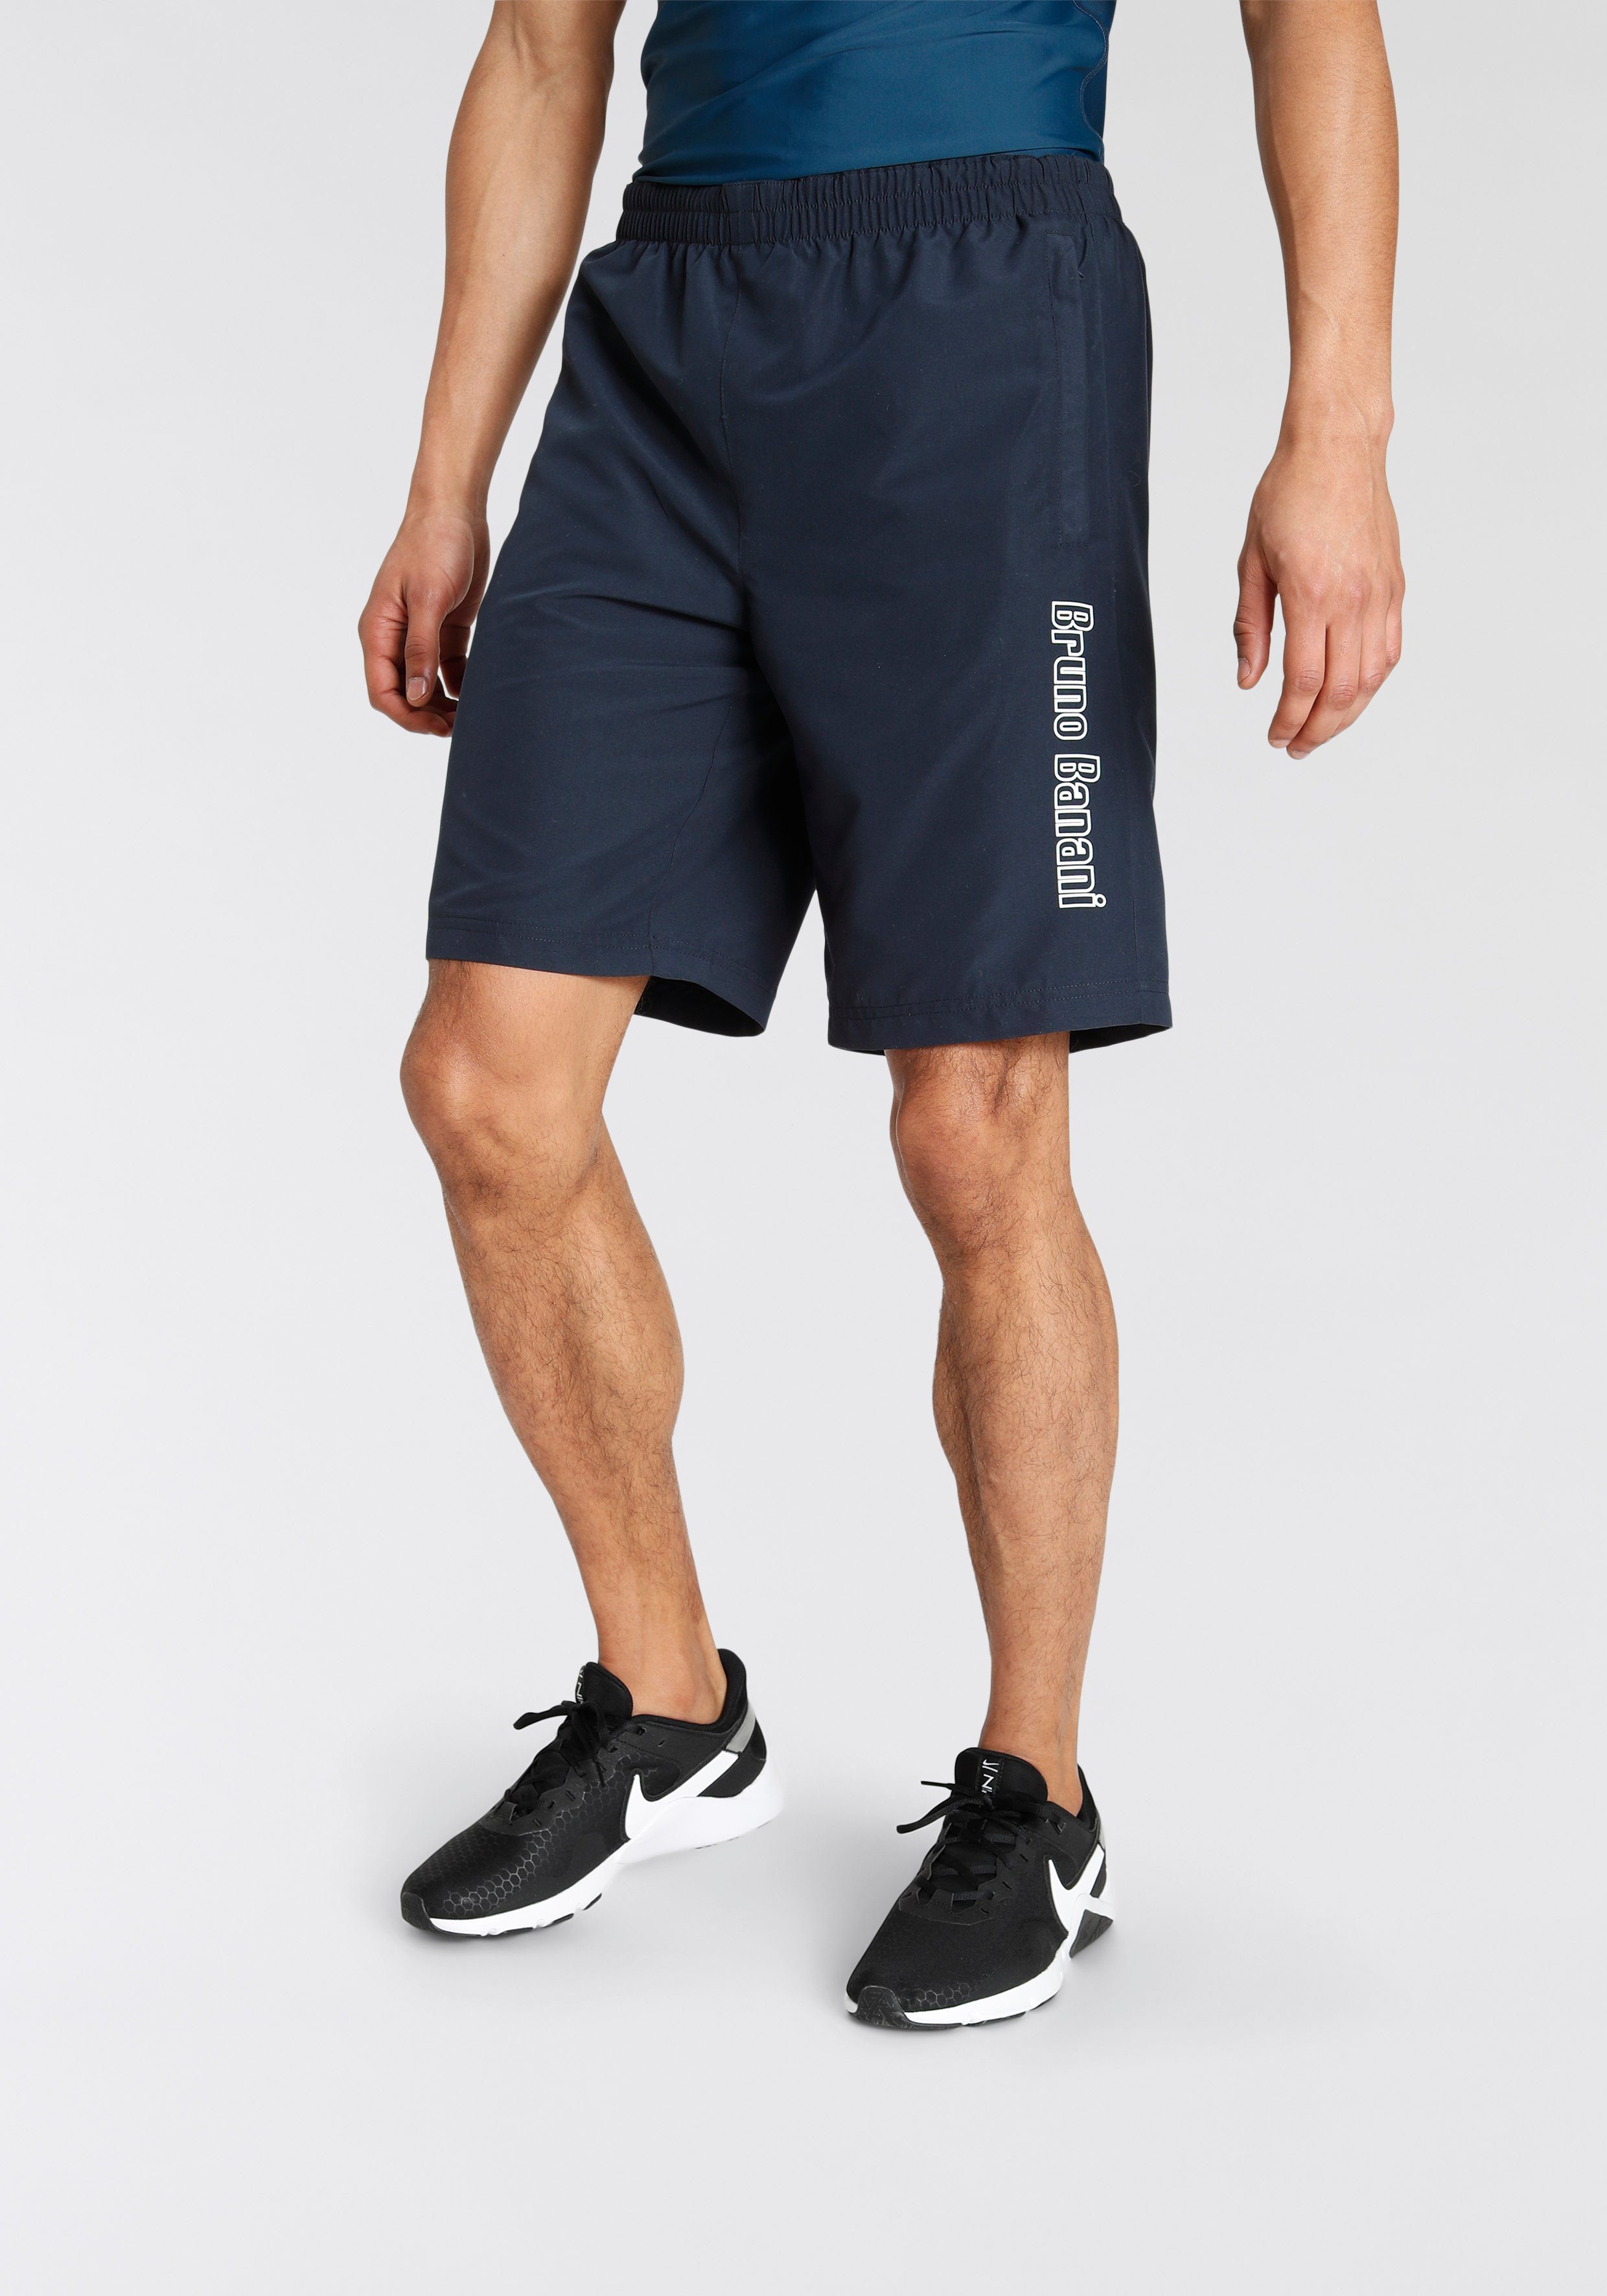 Bruno Banani Funktionsshorts aus recyceltem Material Navy